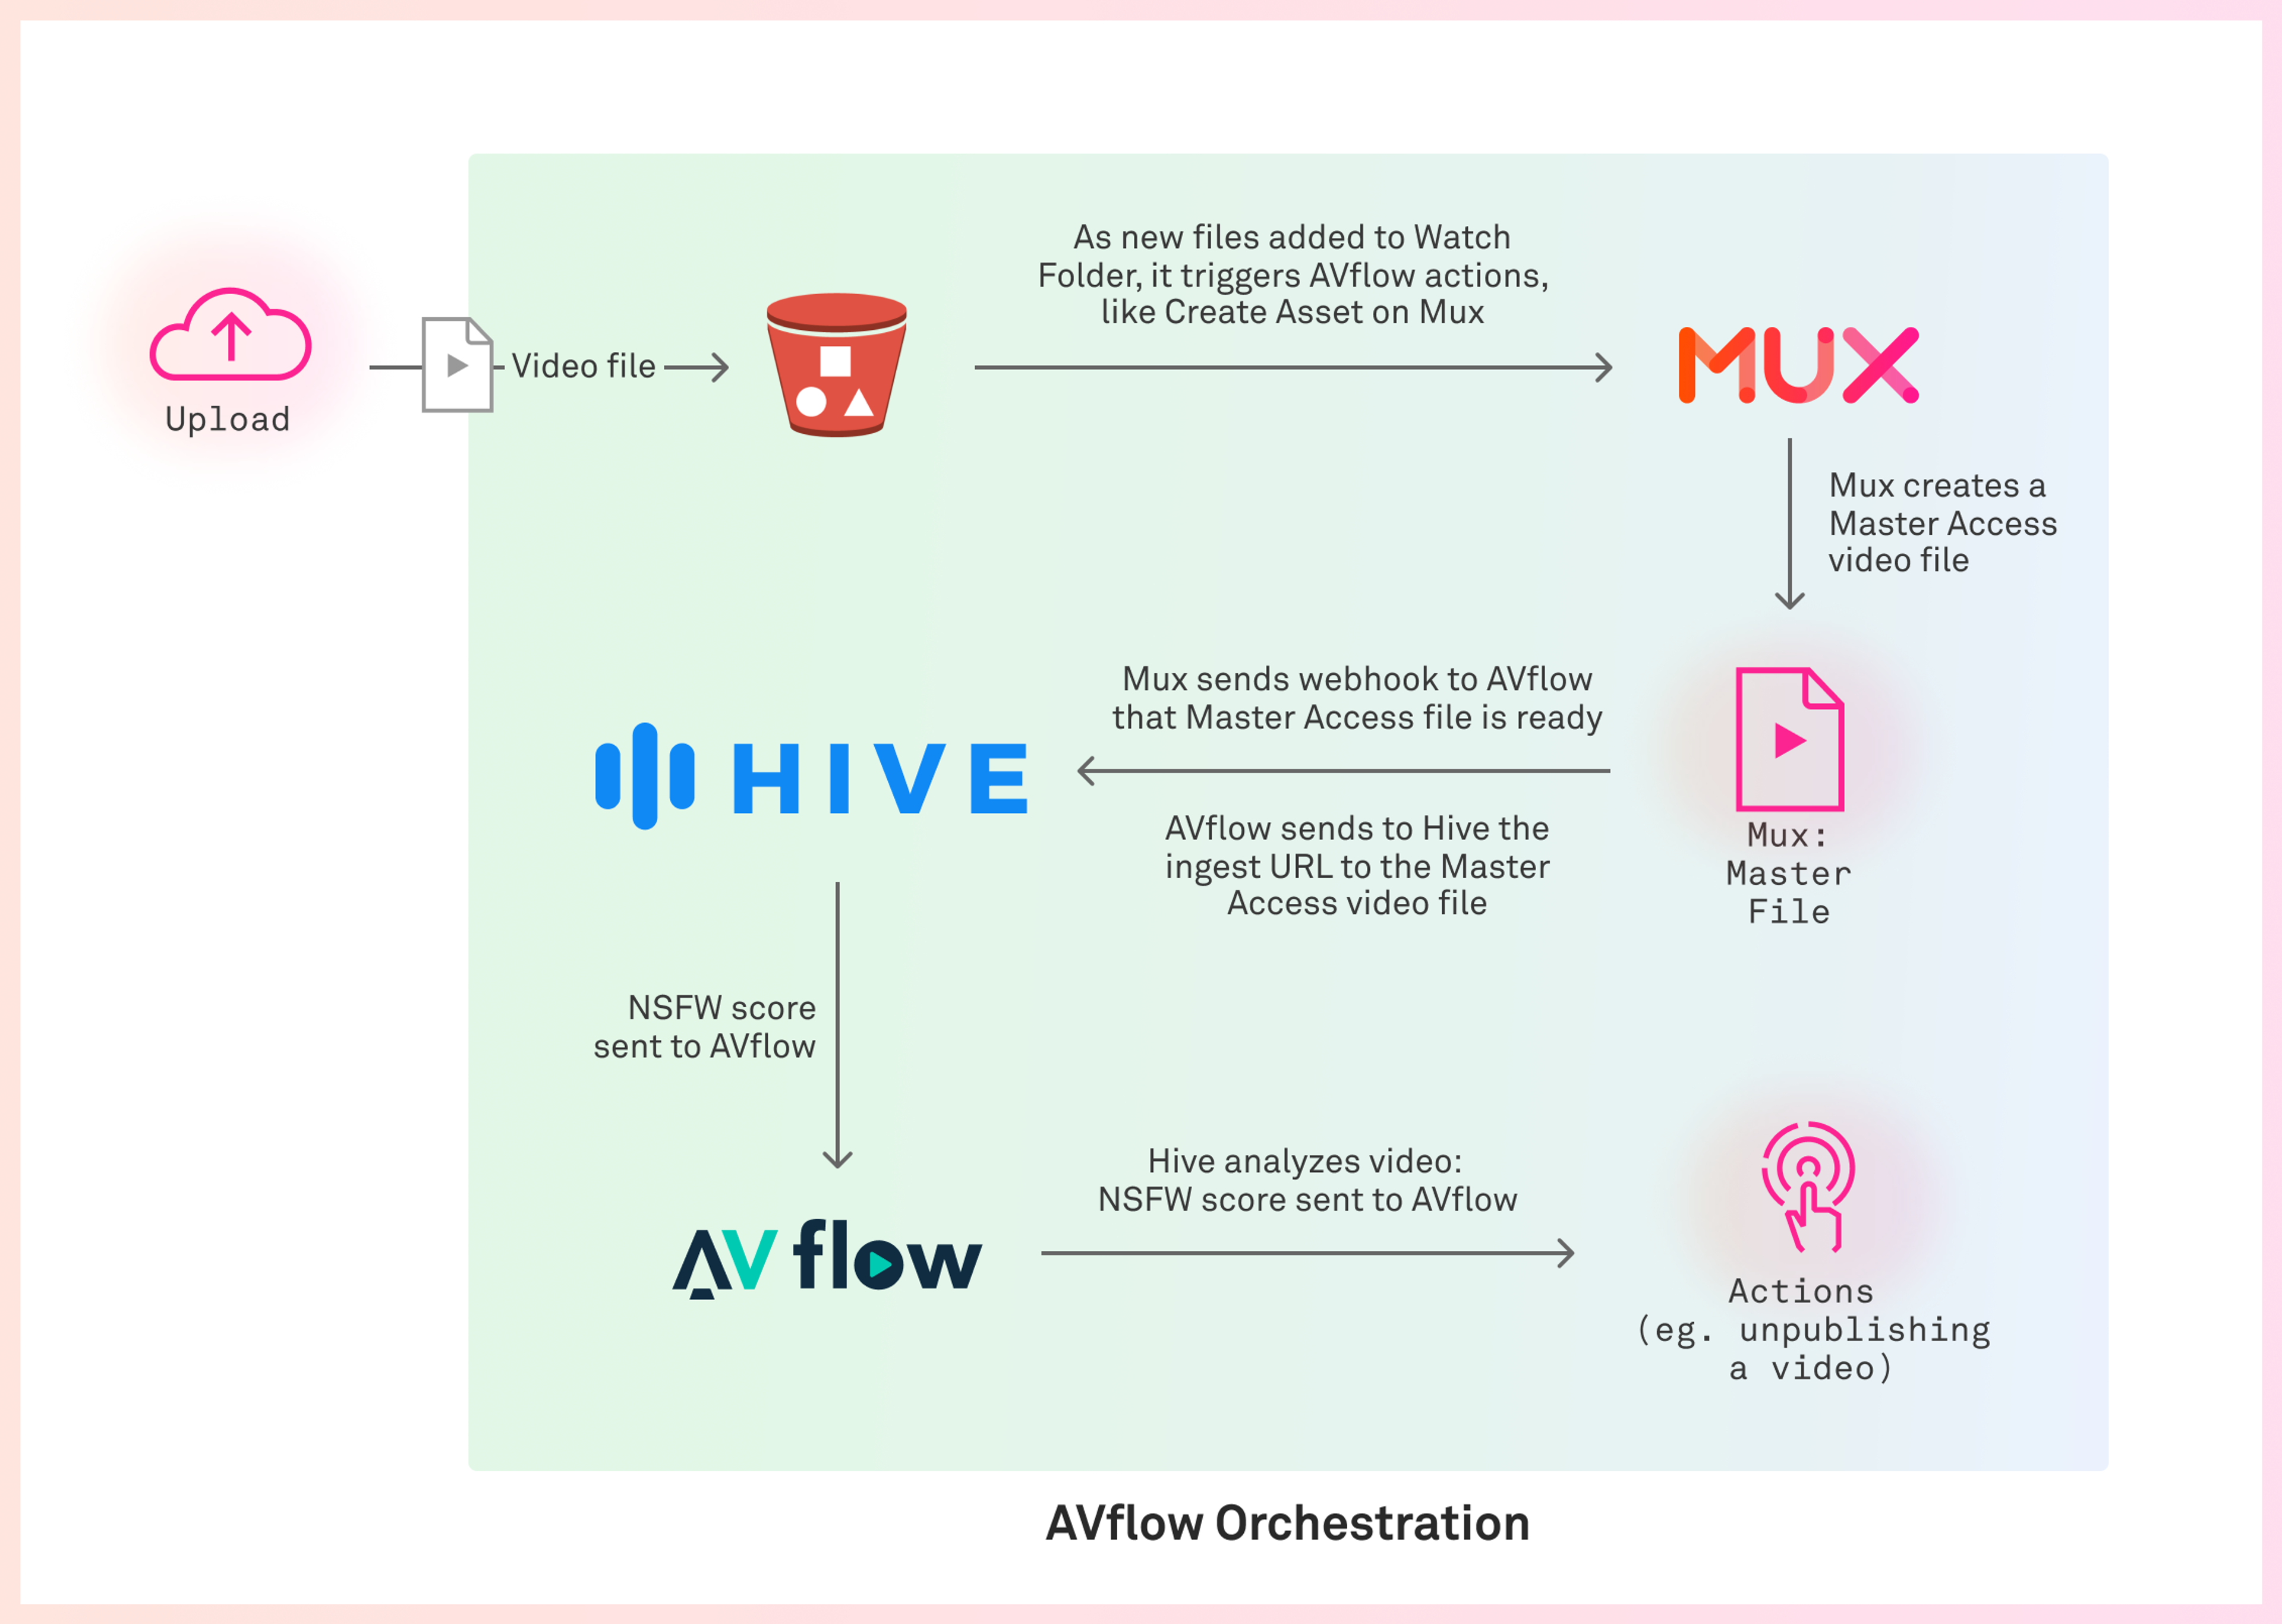 AVflow orchestrates content moderation with Mux and Hive